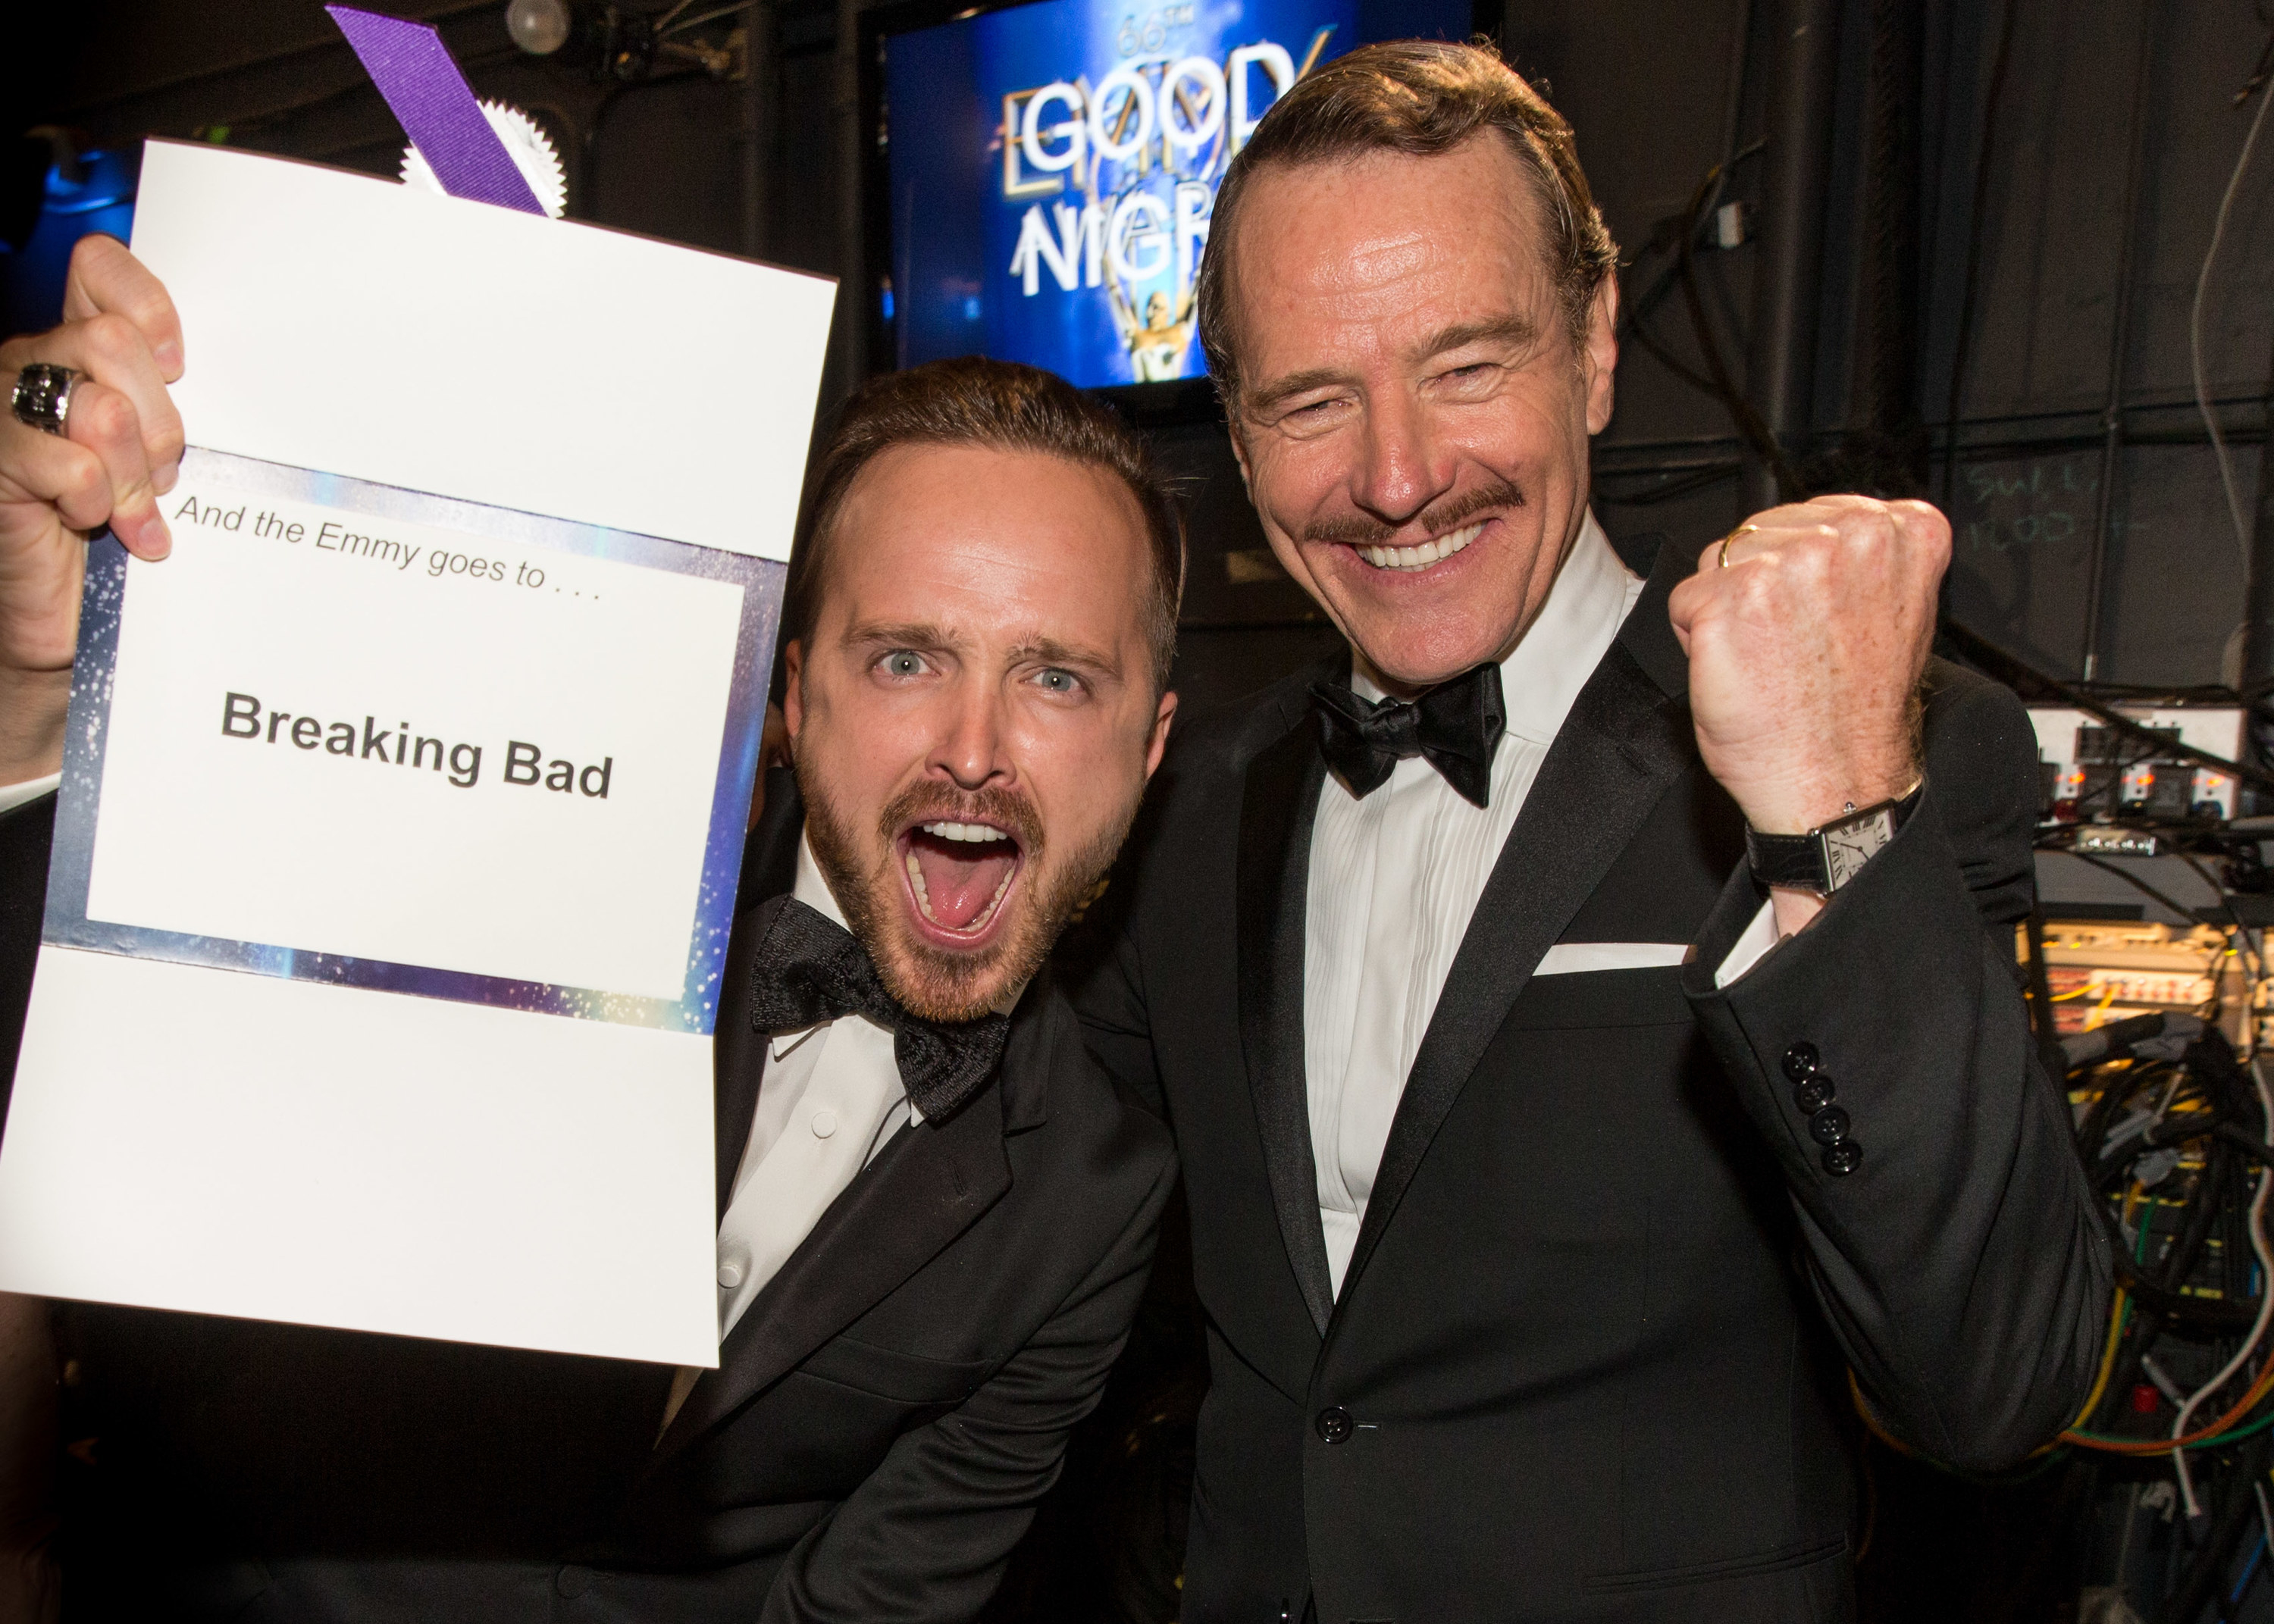 Bryan and Aaron hold the Emmy envelope that says Breaking Bad on it